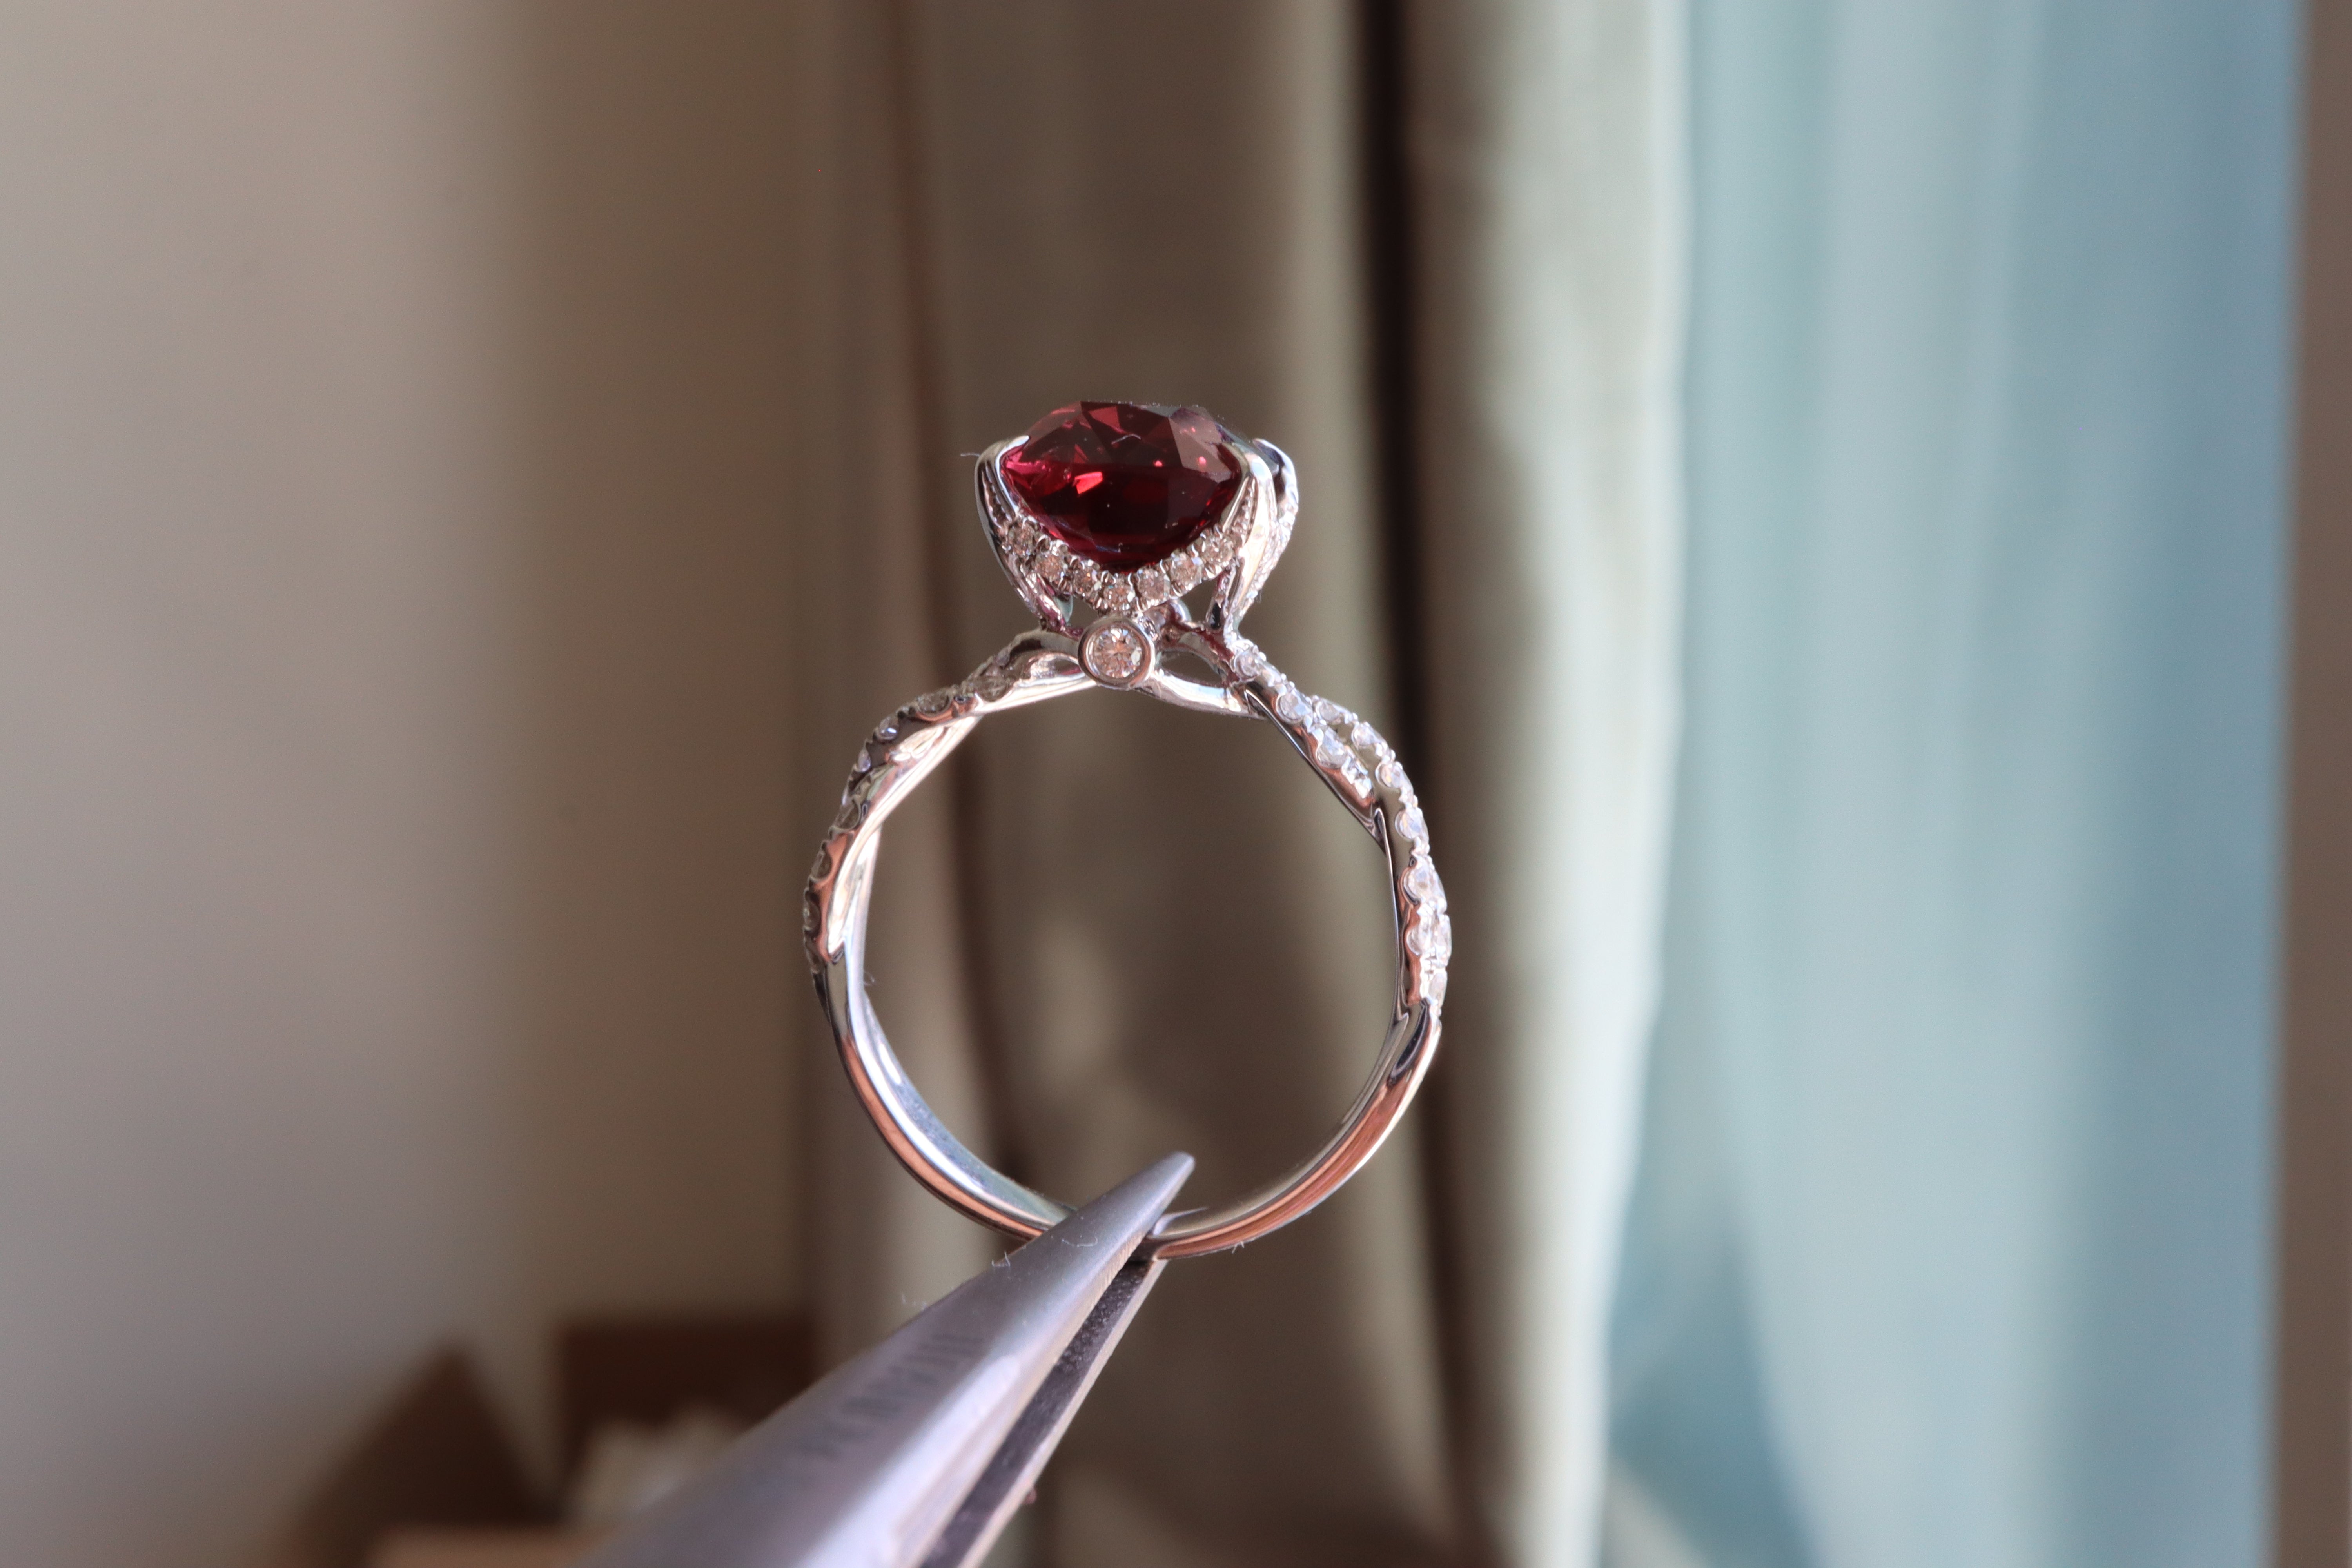 Among the various shades of spinel, red spinel is the most sought-after. High-quality red spinels have seen a dramatic increase in value over the past several years.
This ring features a stunning 4.28-carat untreated red spinel, measuring 10.06 x